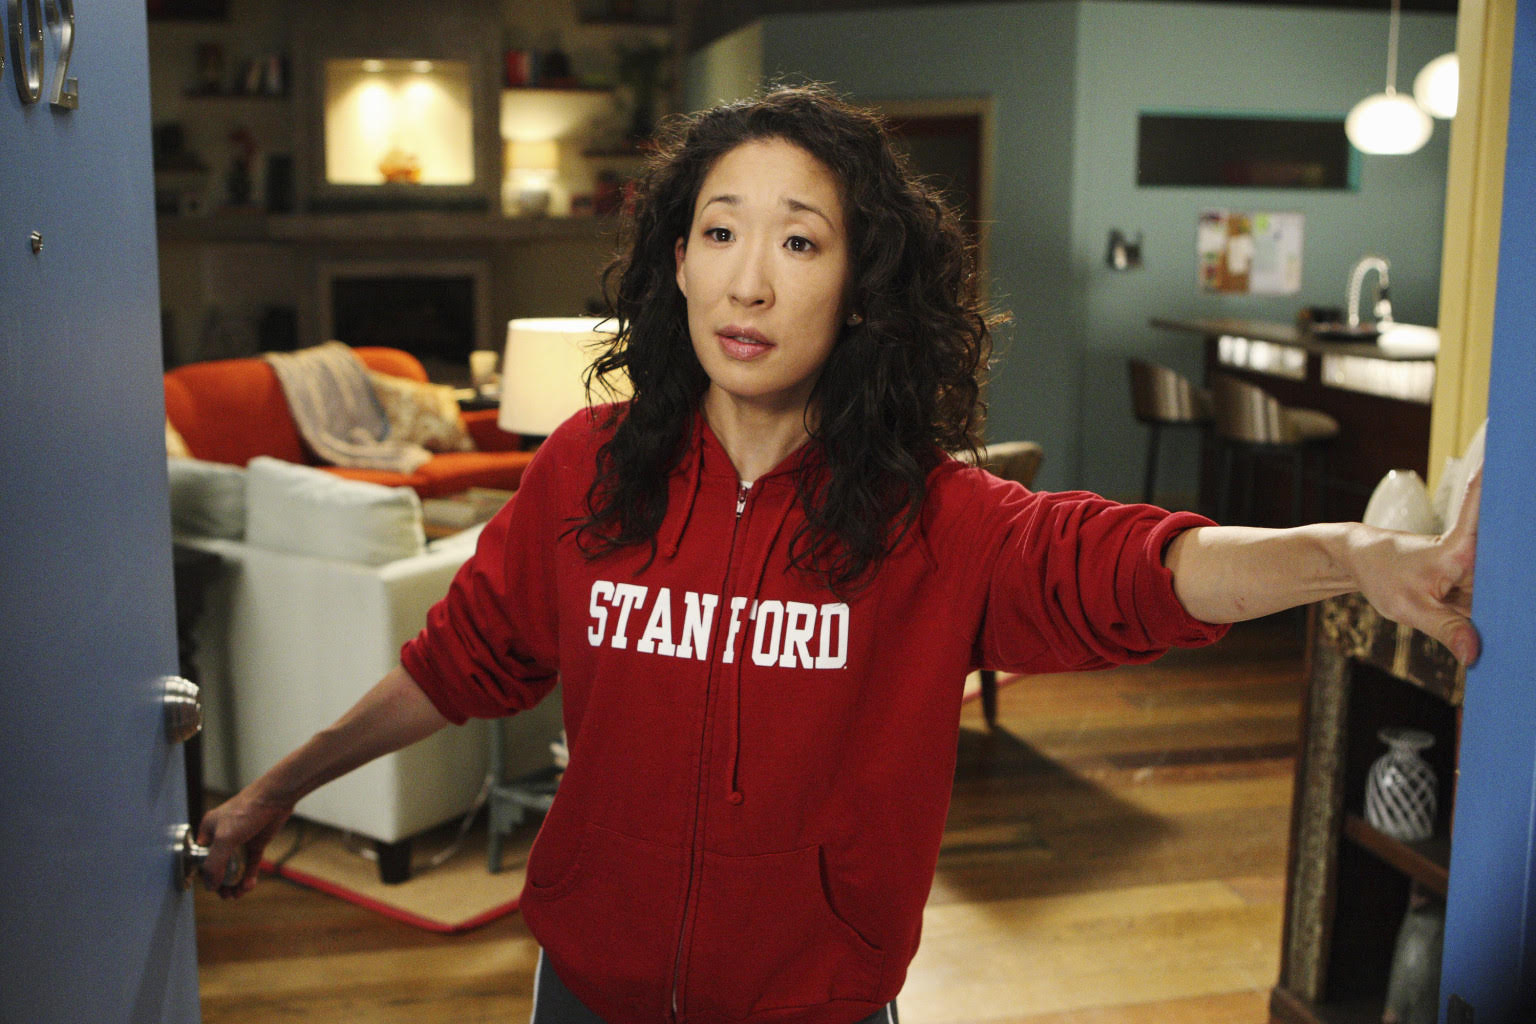 Greys Anatomy: Sandra Oh Says Gaining Fame From the 